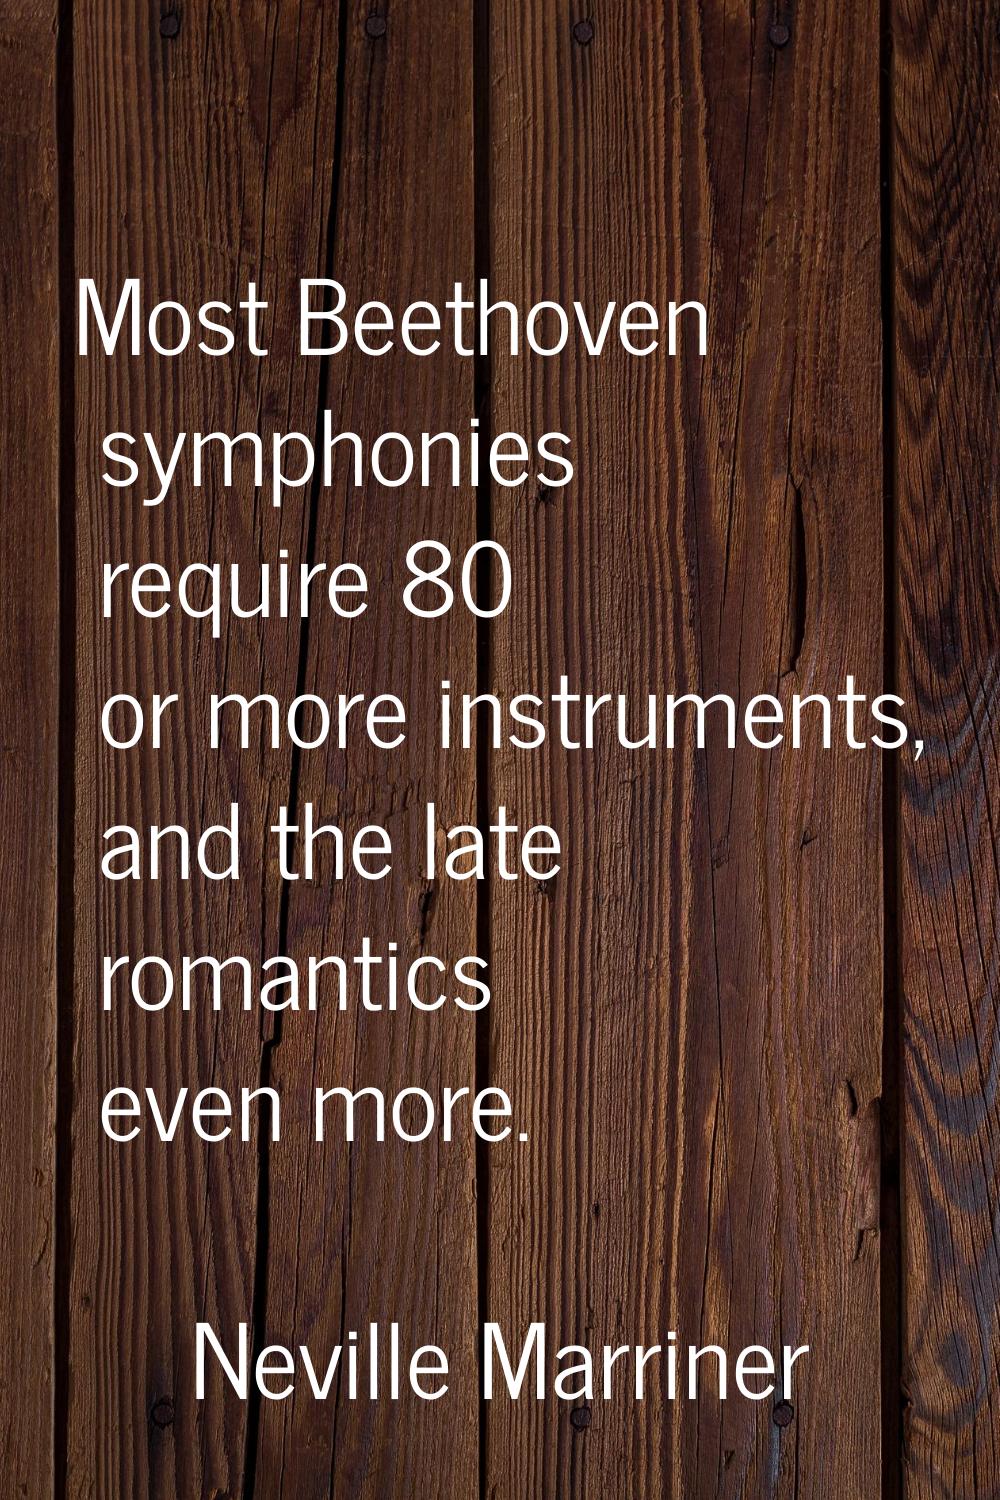 Most Beethoven symphonies require 80 or more instruments, and the late romantics even more.